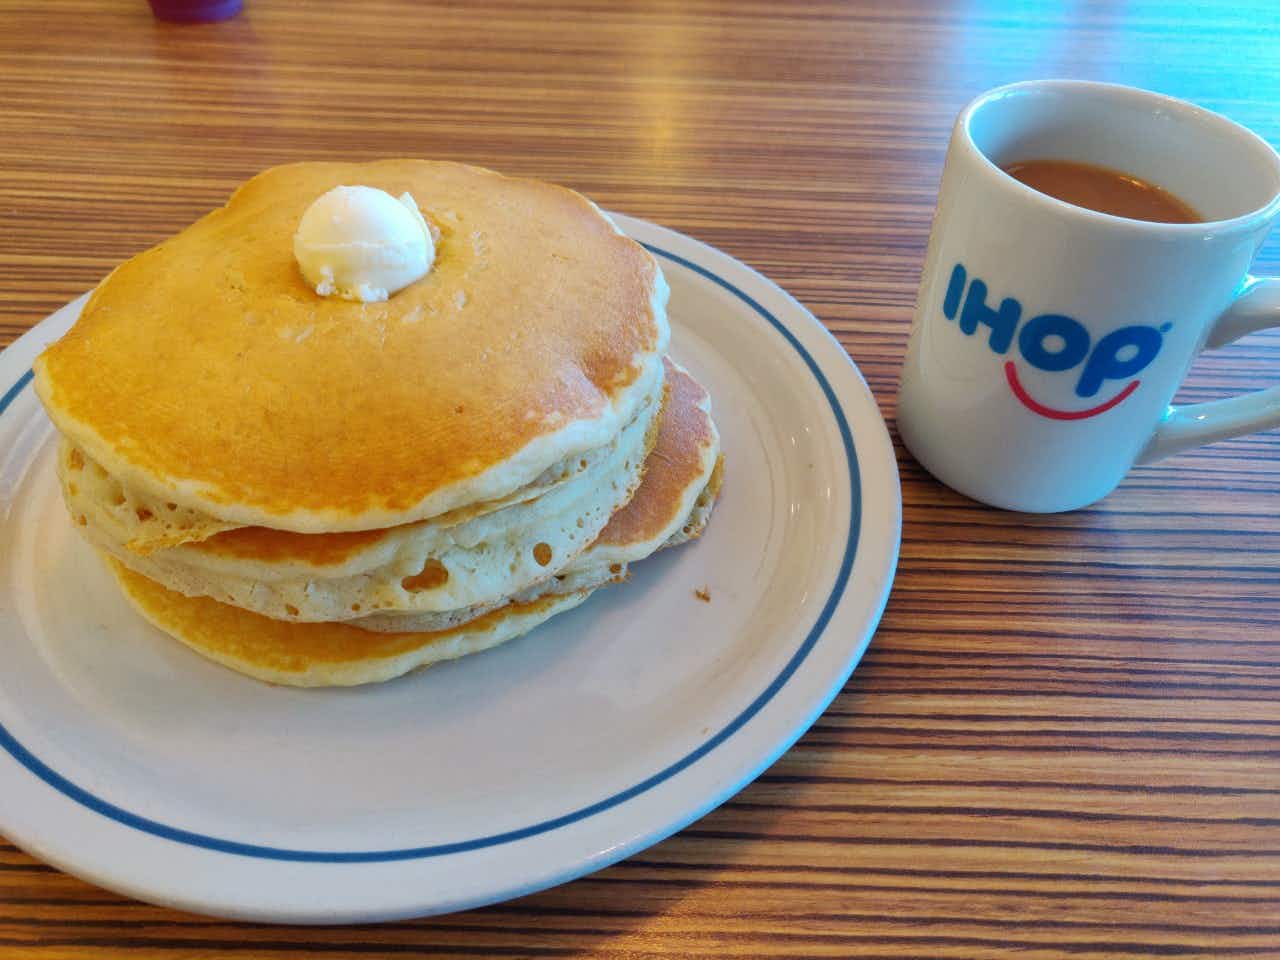 ihops full stack of pancakes next to a cup of coffee